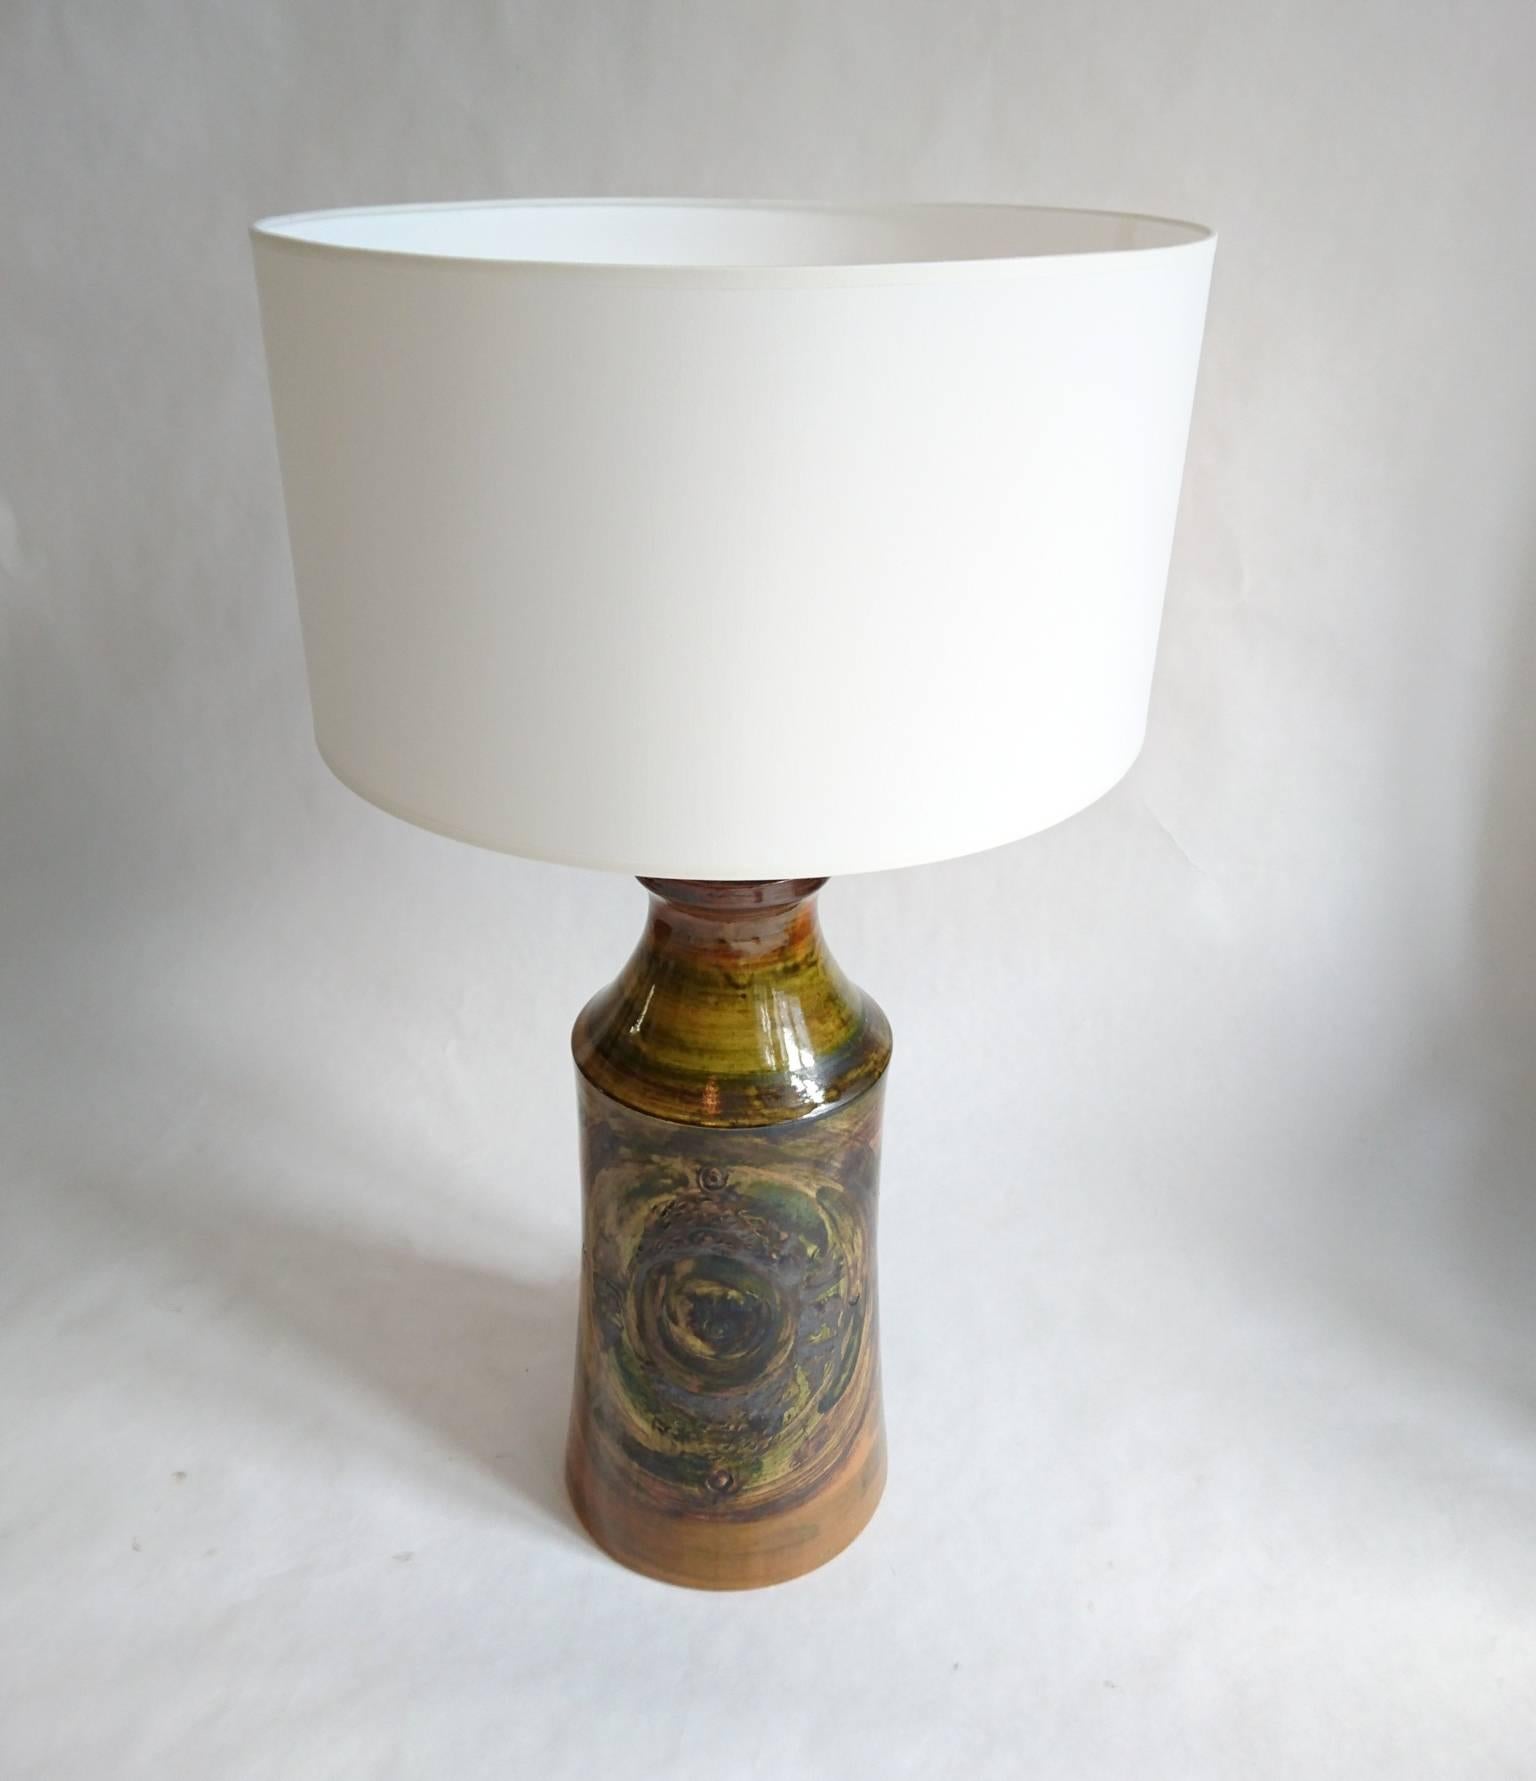 This Swedish handmade ceramic table lamp which is not only fantastic but also cool and striking. Has a multicolored hand-painted decor in browns, greens and black. Comes with a brand new drum shade in cotton. Electricity is functioning.